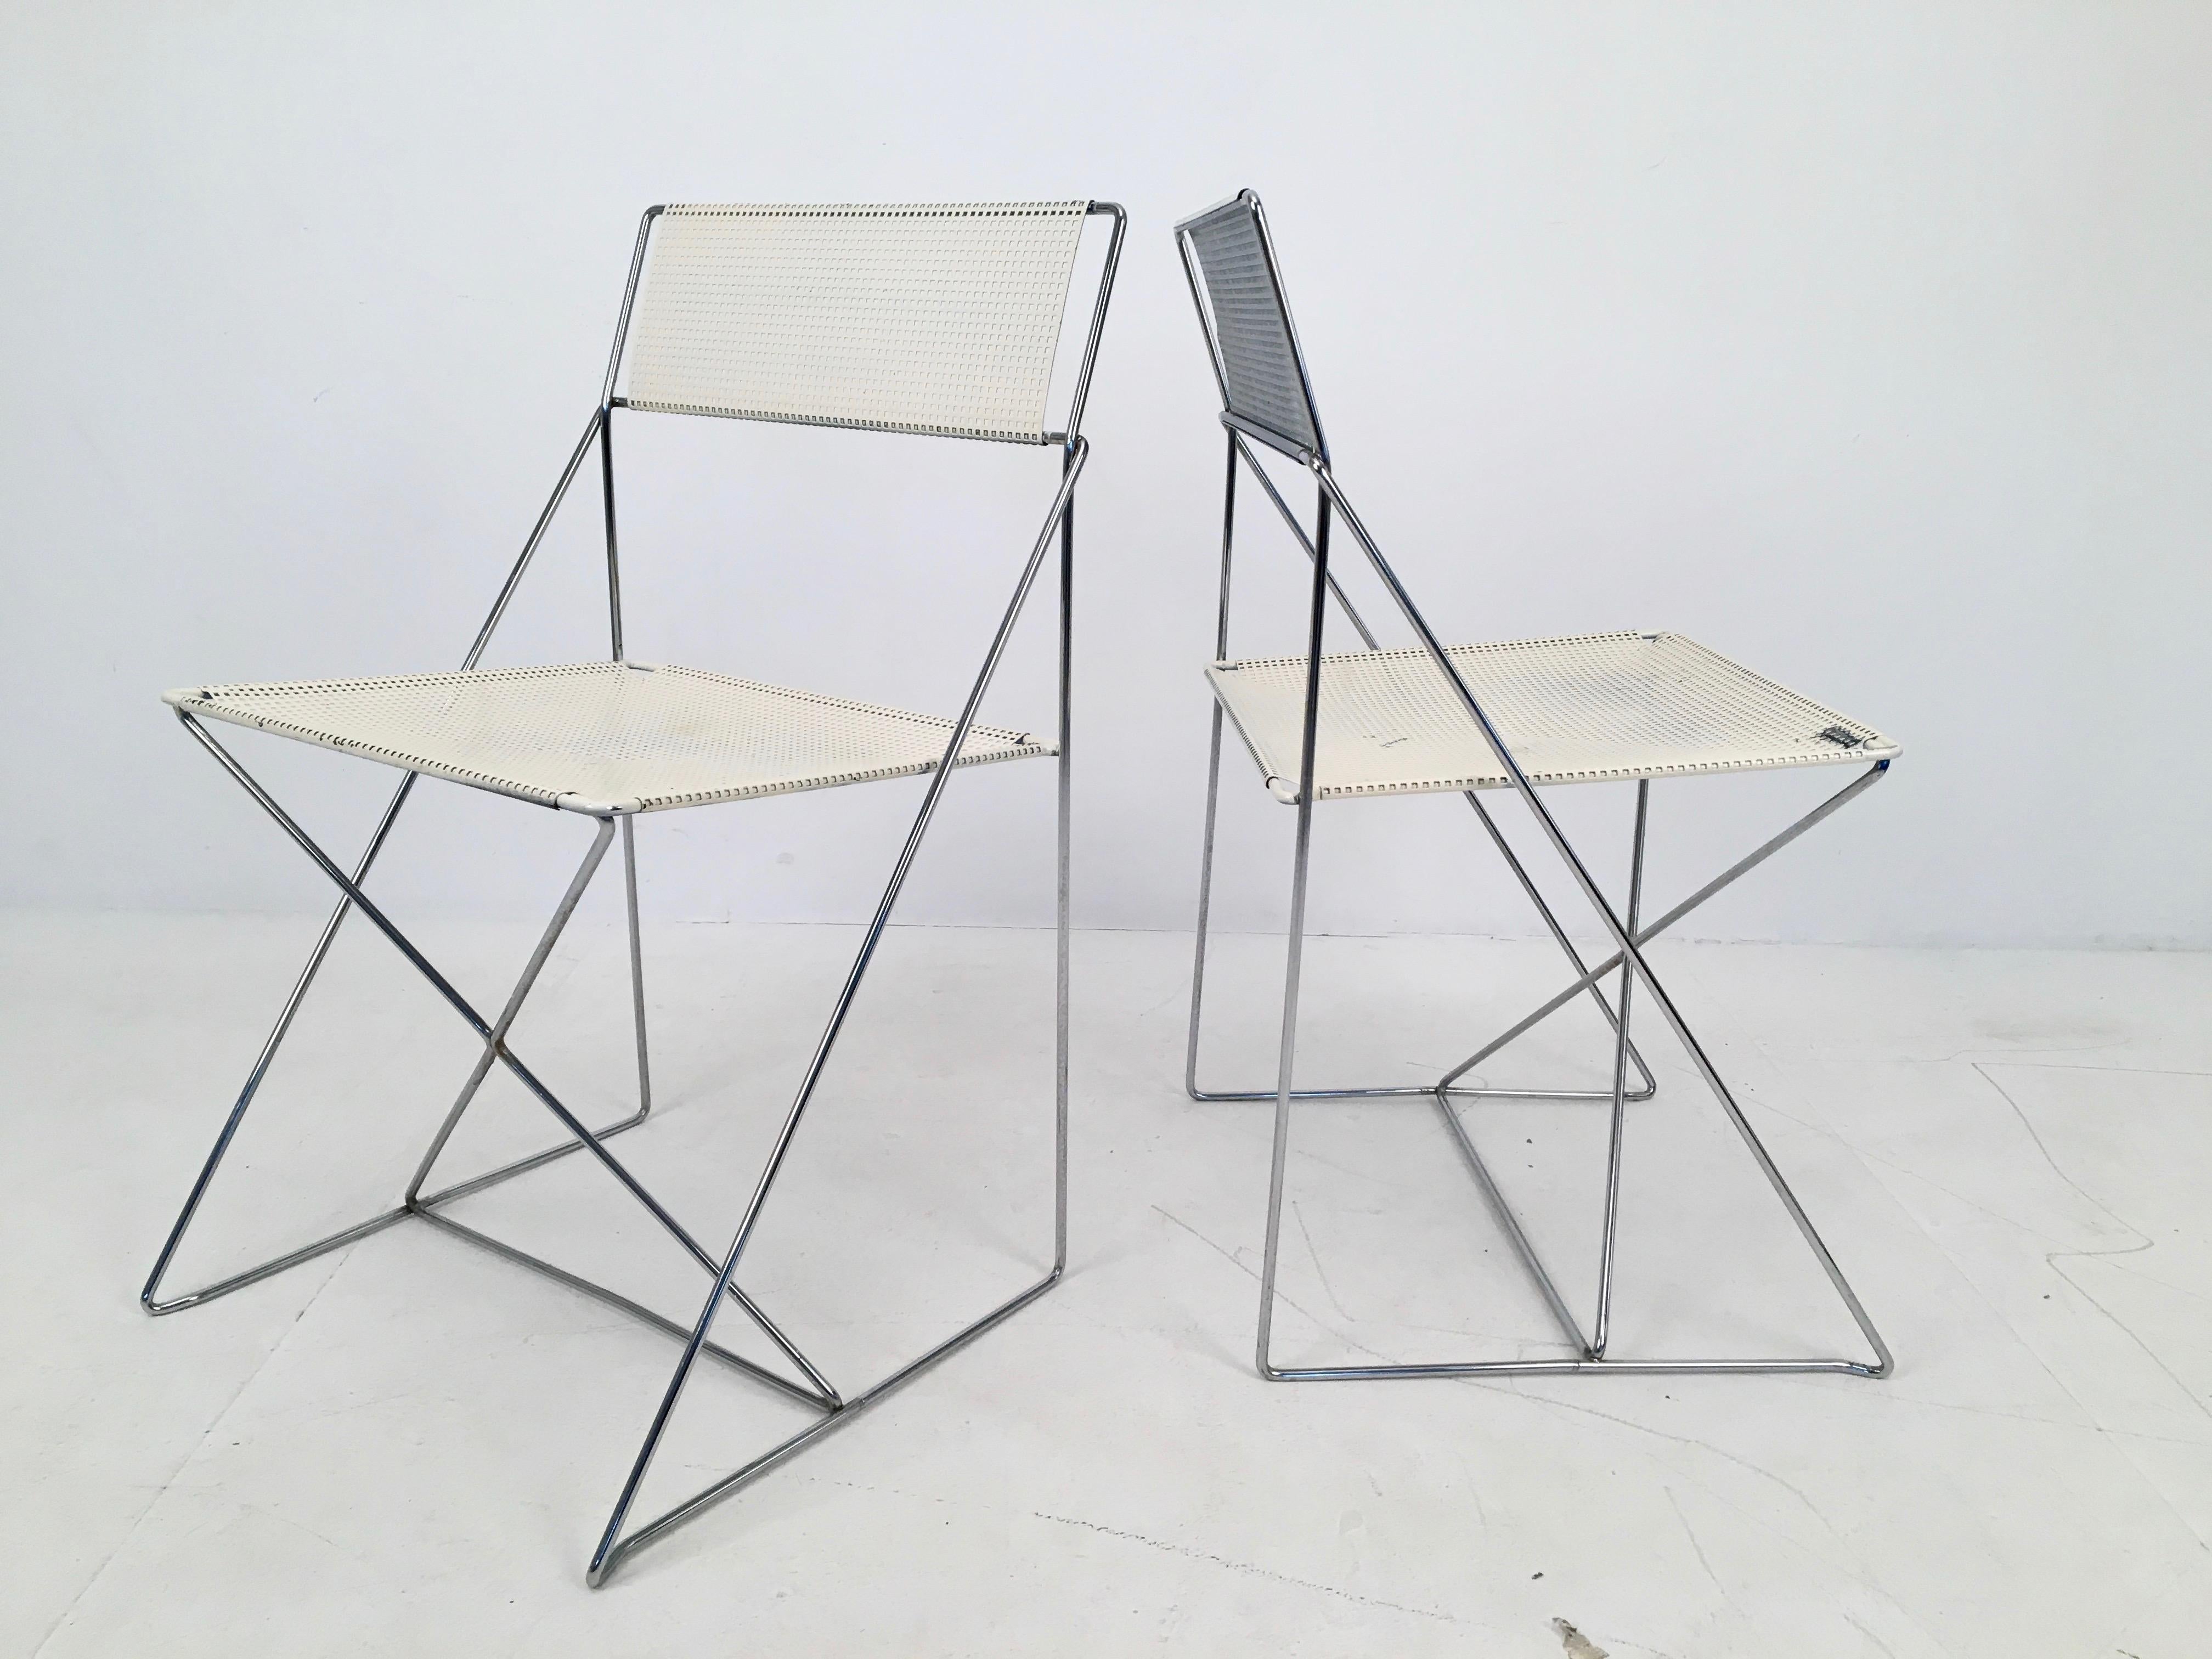 Pair of white Mid-Century Modern ‘X-Line’ metal stacking chairs designed by Niels Jørgen Haugesen and produced by Hybodan in Copenhagen, Denmark, circa 1970.

Industrial meets Postmodern meet Minimalist, these chairs are very sculptural in